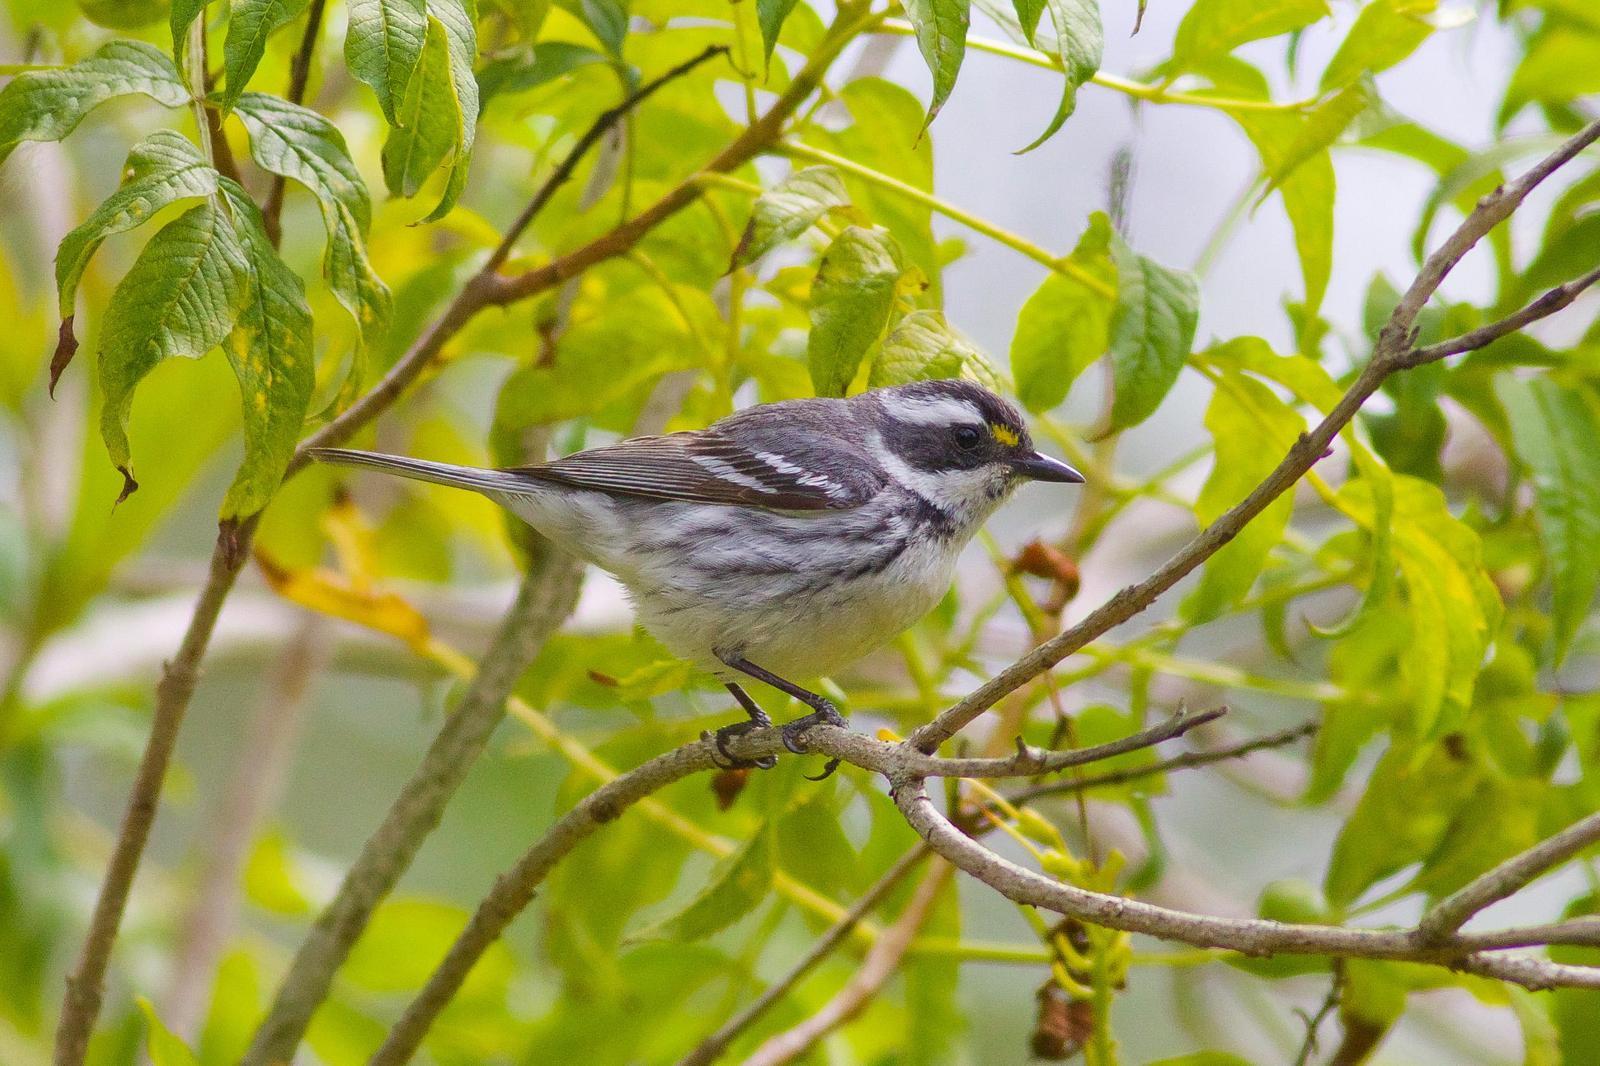 Black-throated Gray Warbler Photo by Tom Ford-Hutchinson